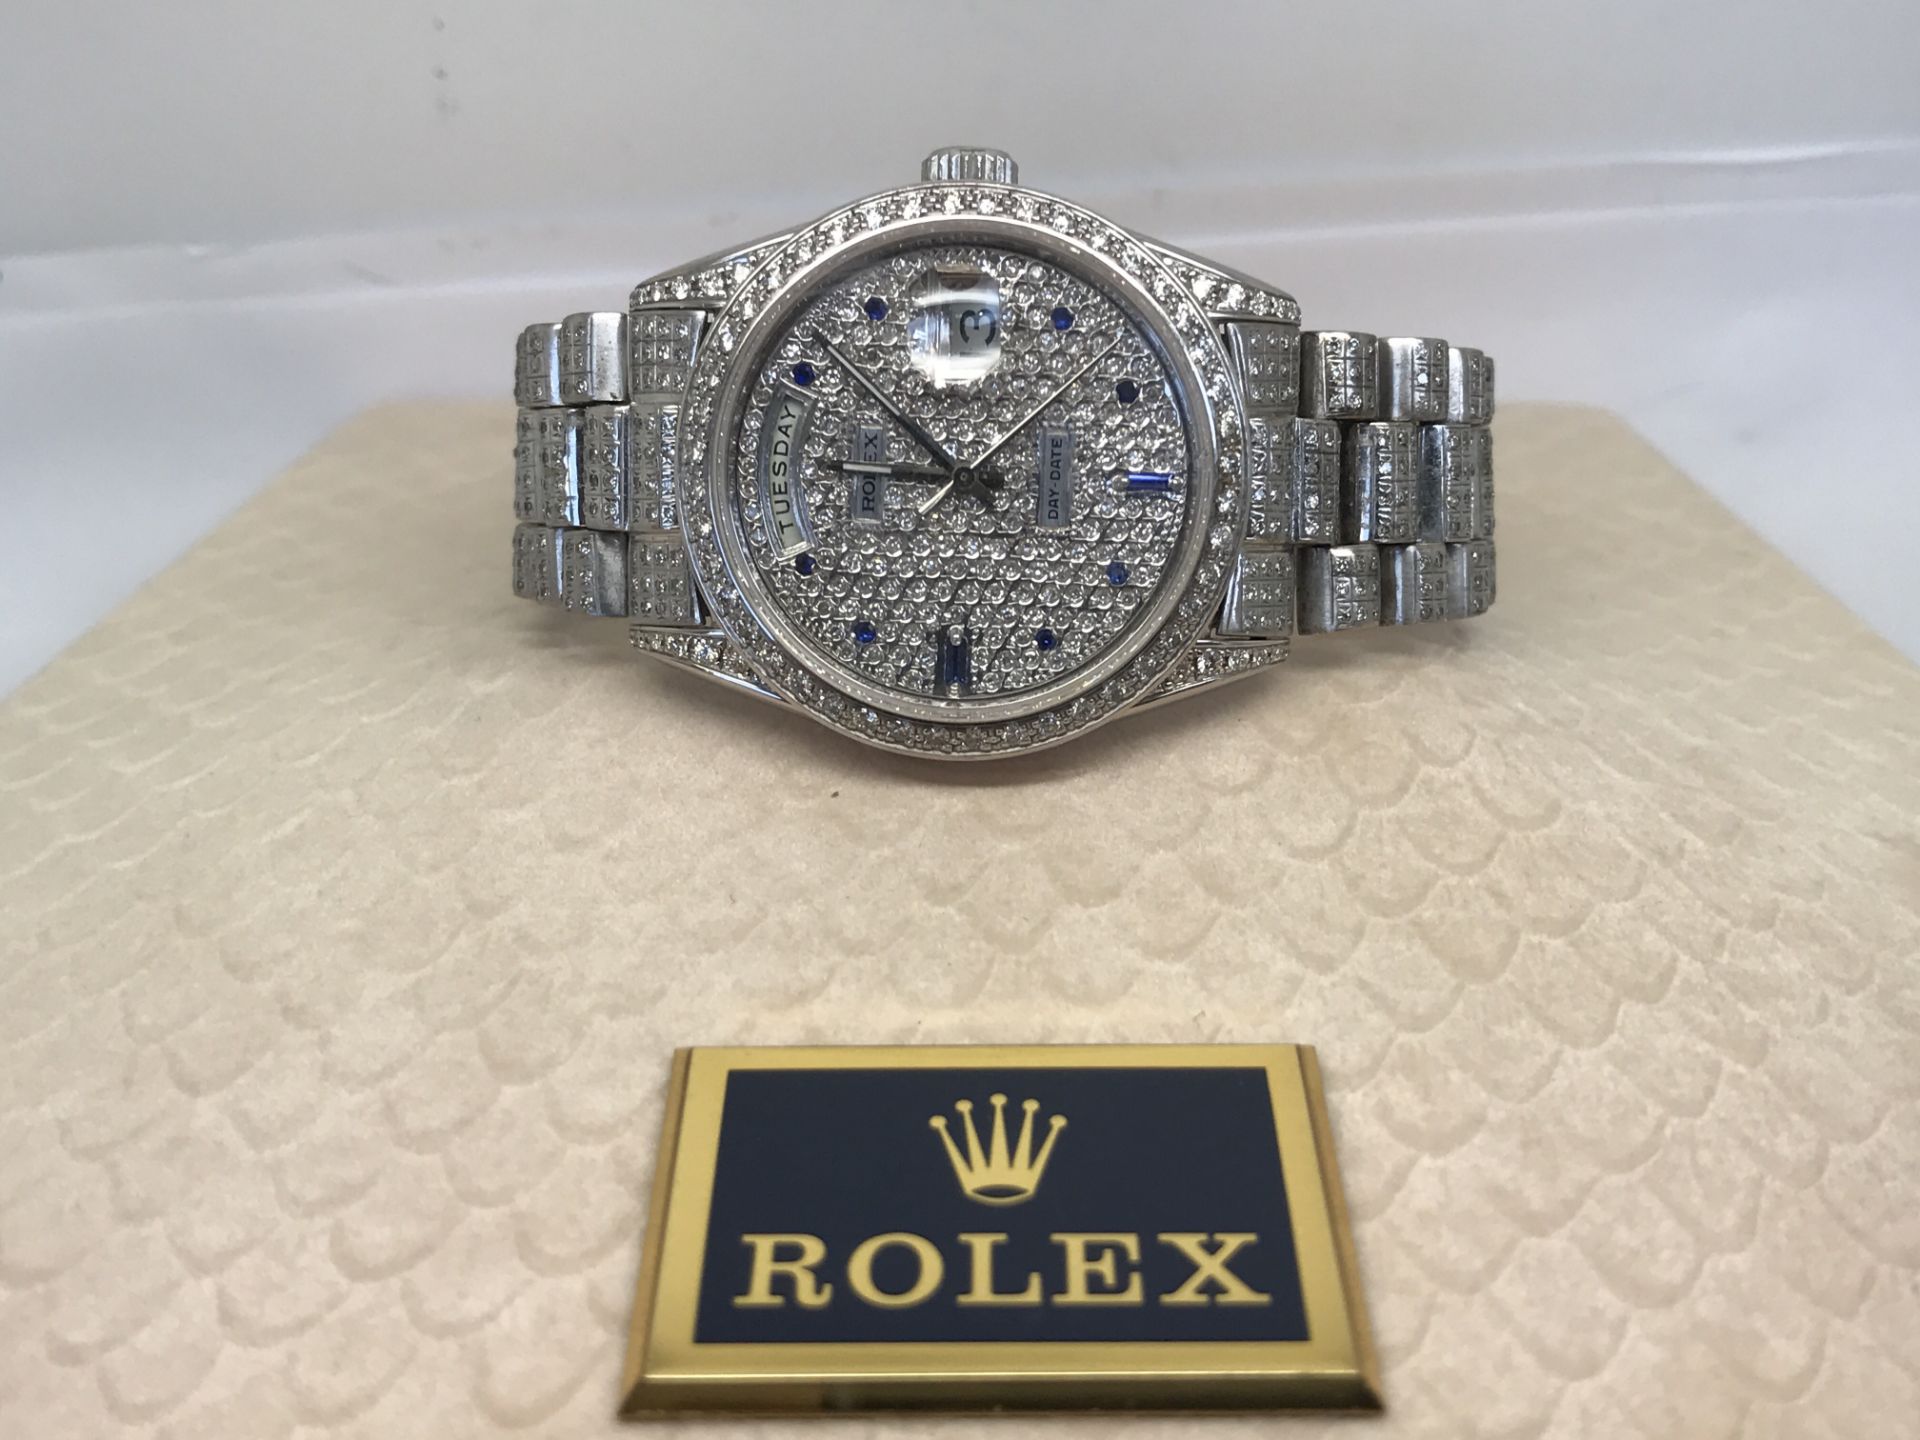 Mens Solid White Gold Diamond/ Sapphire Day-Date “Super President” Watch - Image 11 of 13